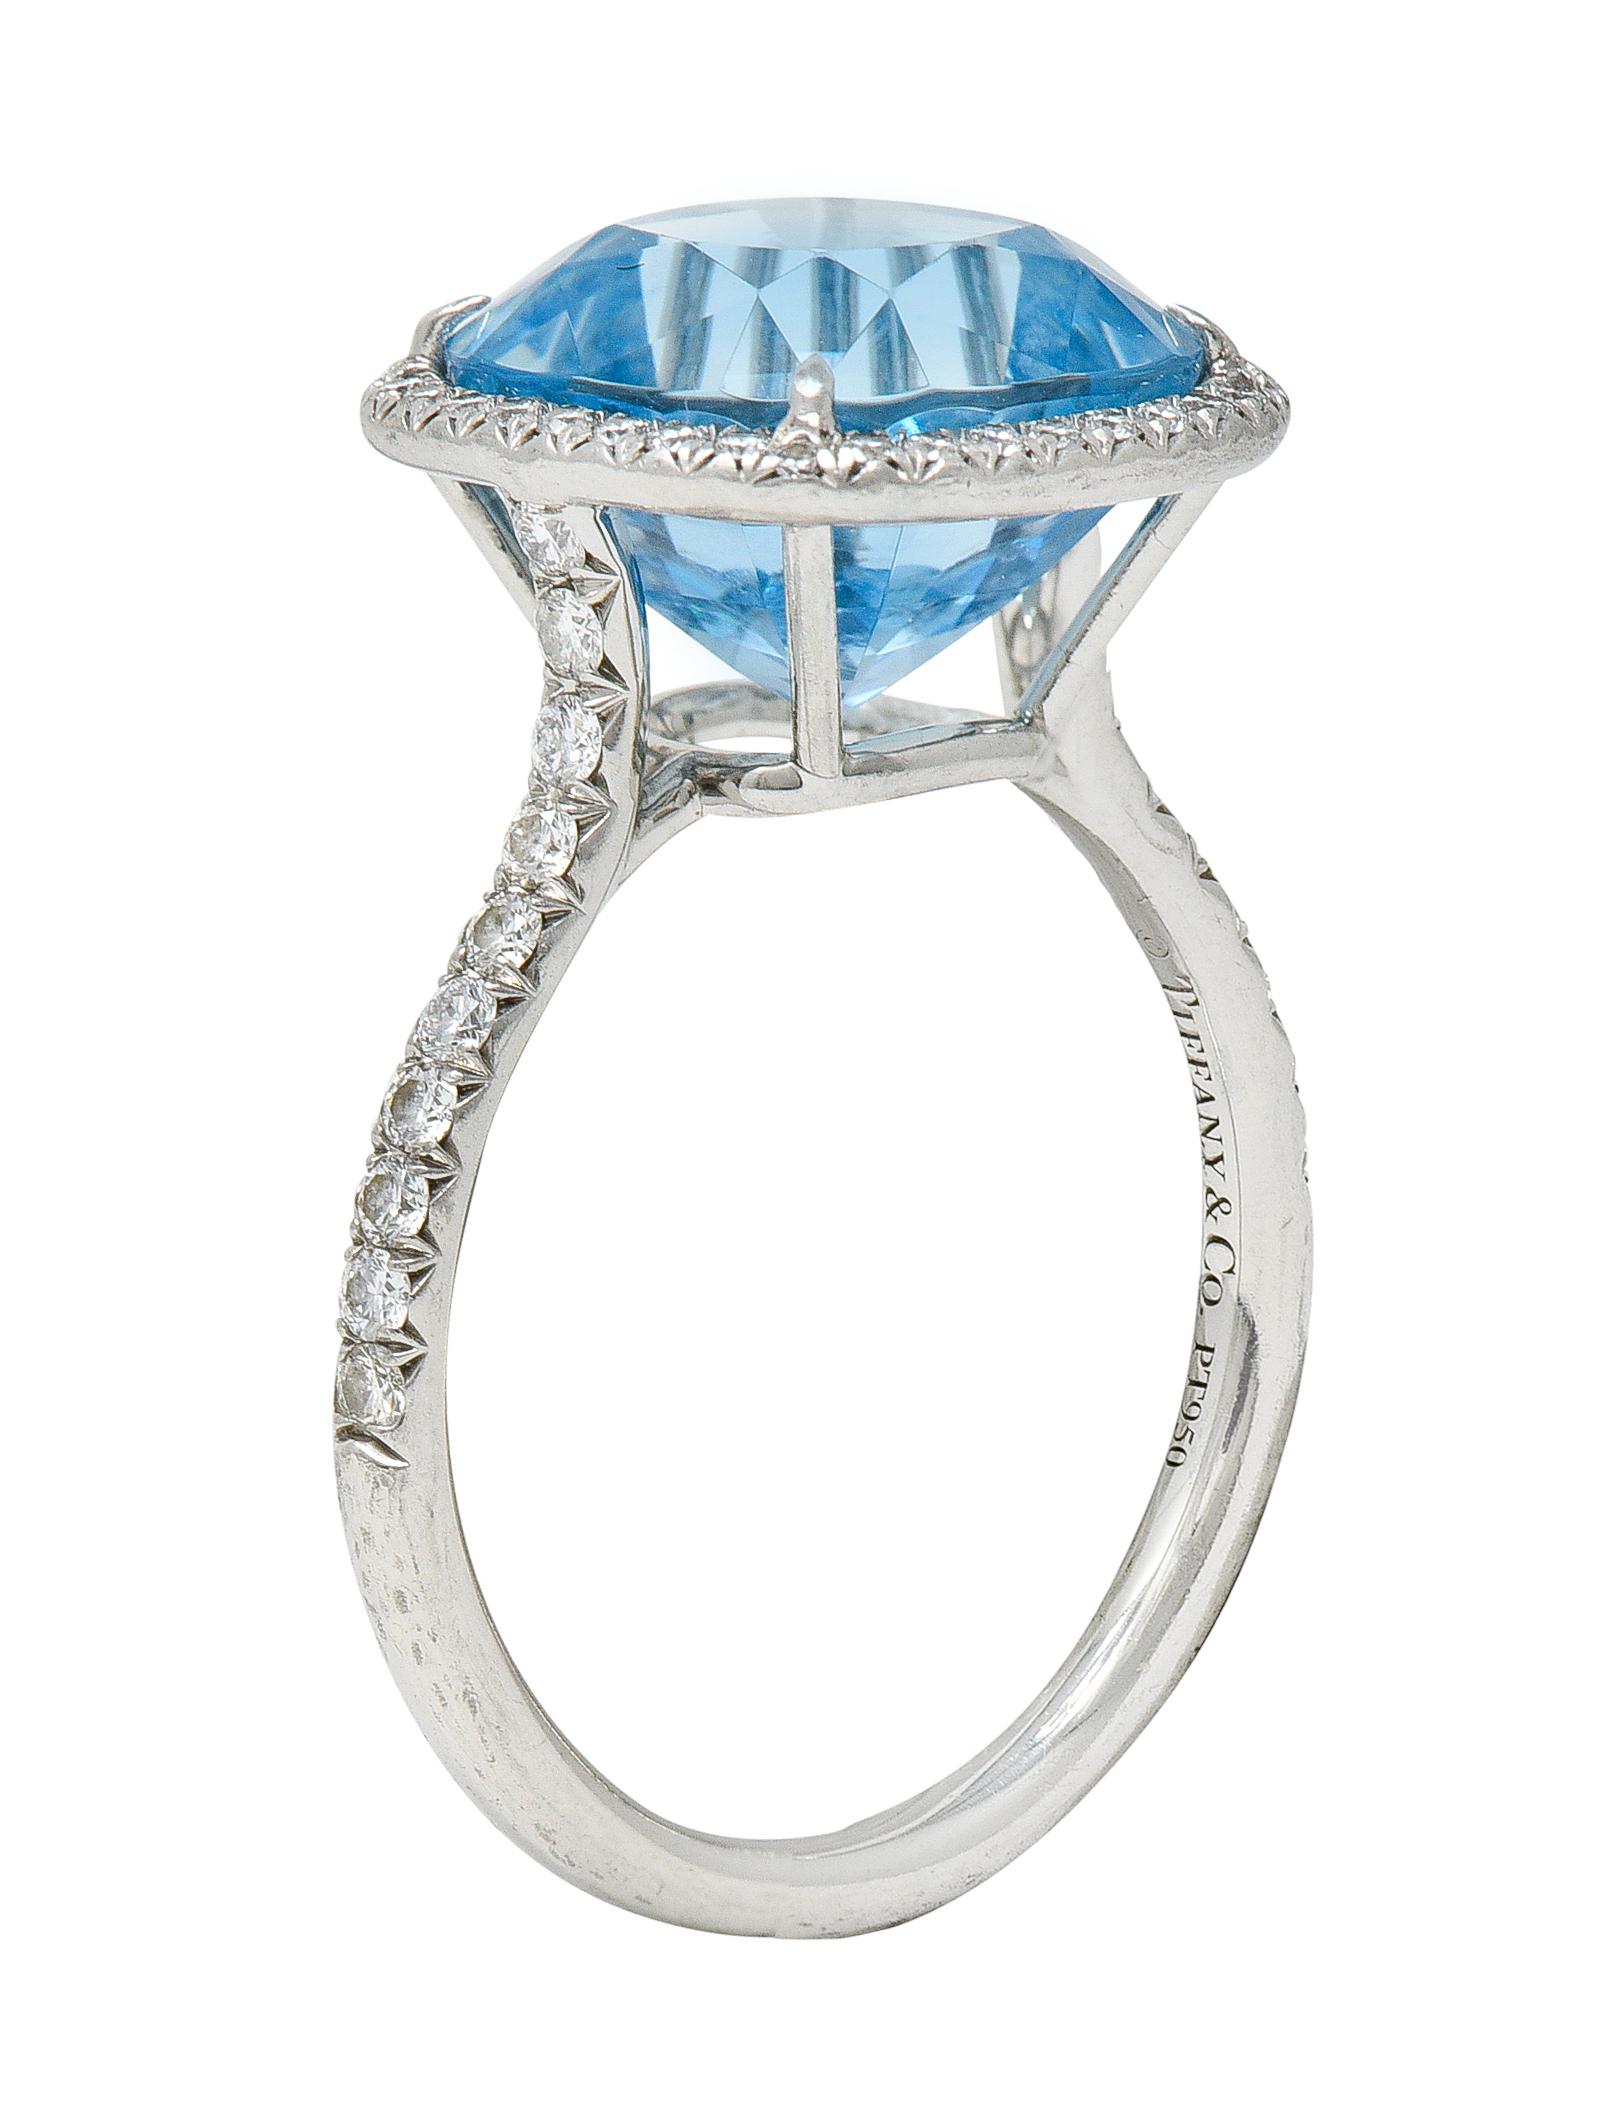 Featuring a cushion cut aquamarine weighing approximately 7.35 carats

Eye clean with saturated and uniform sky-blue color

With a round brilliant cut diamond halo and shoulder accents

Weighing in total approximately 0.85 carat with F/G color and